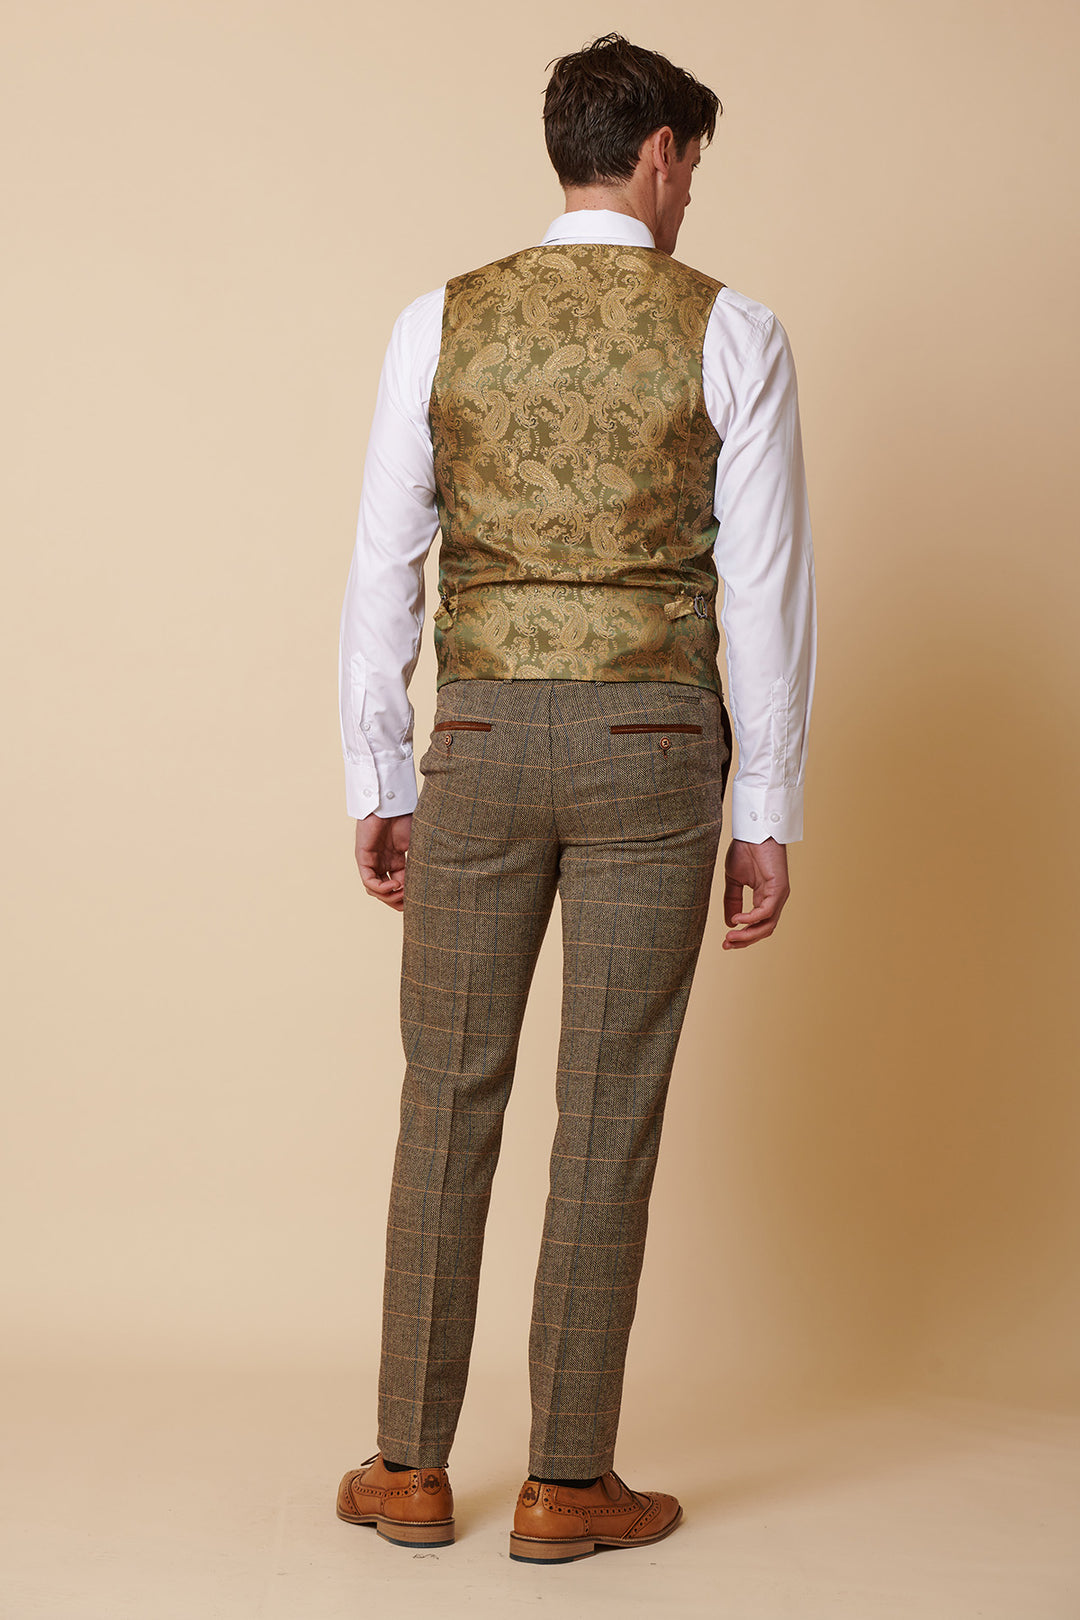 TED - Tan Tweed Check Double Breasted Waistcoat